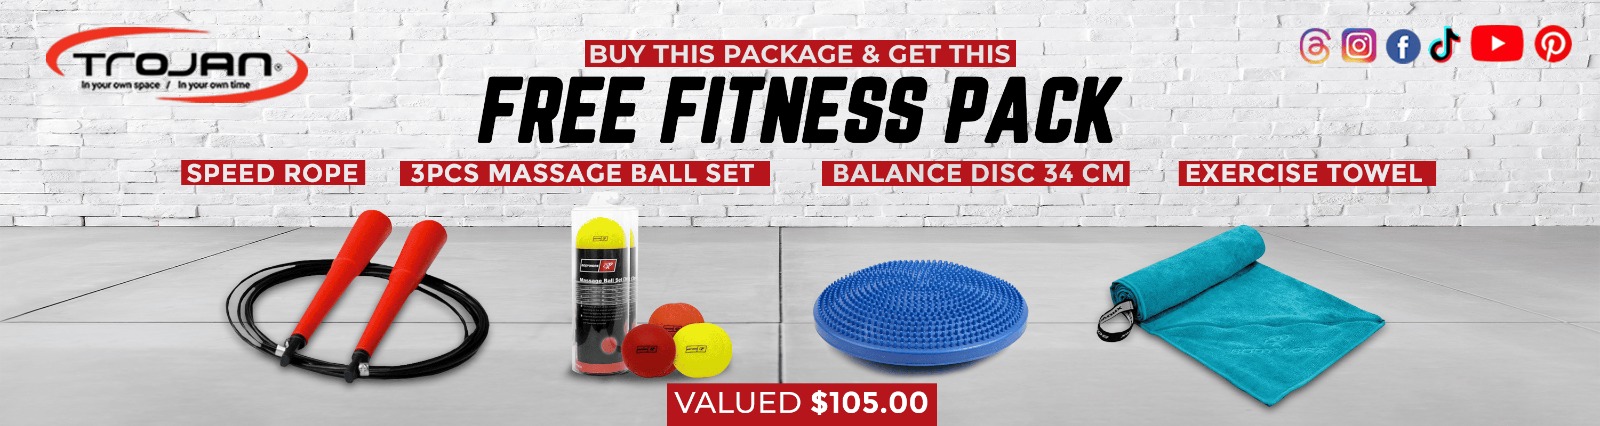 FREE FIT PACK FEB24